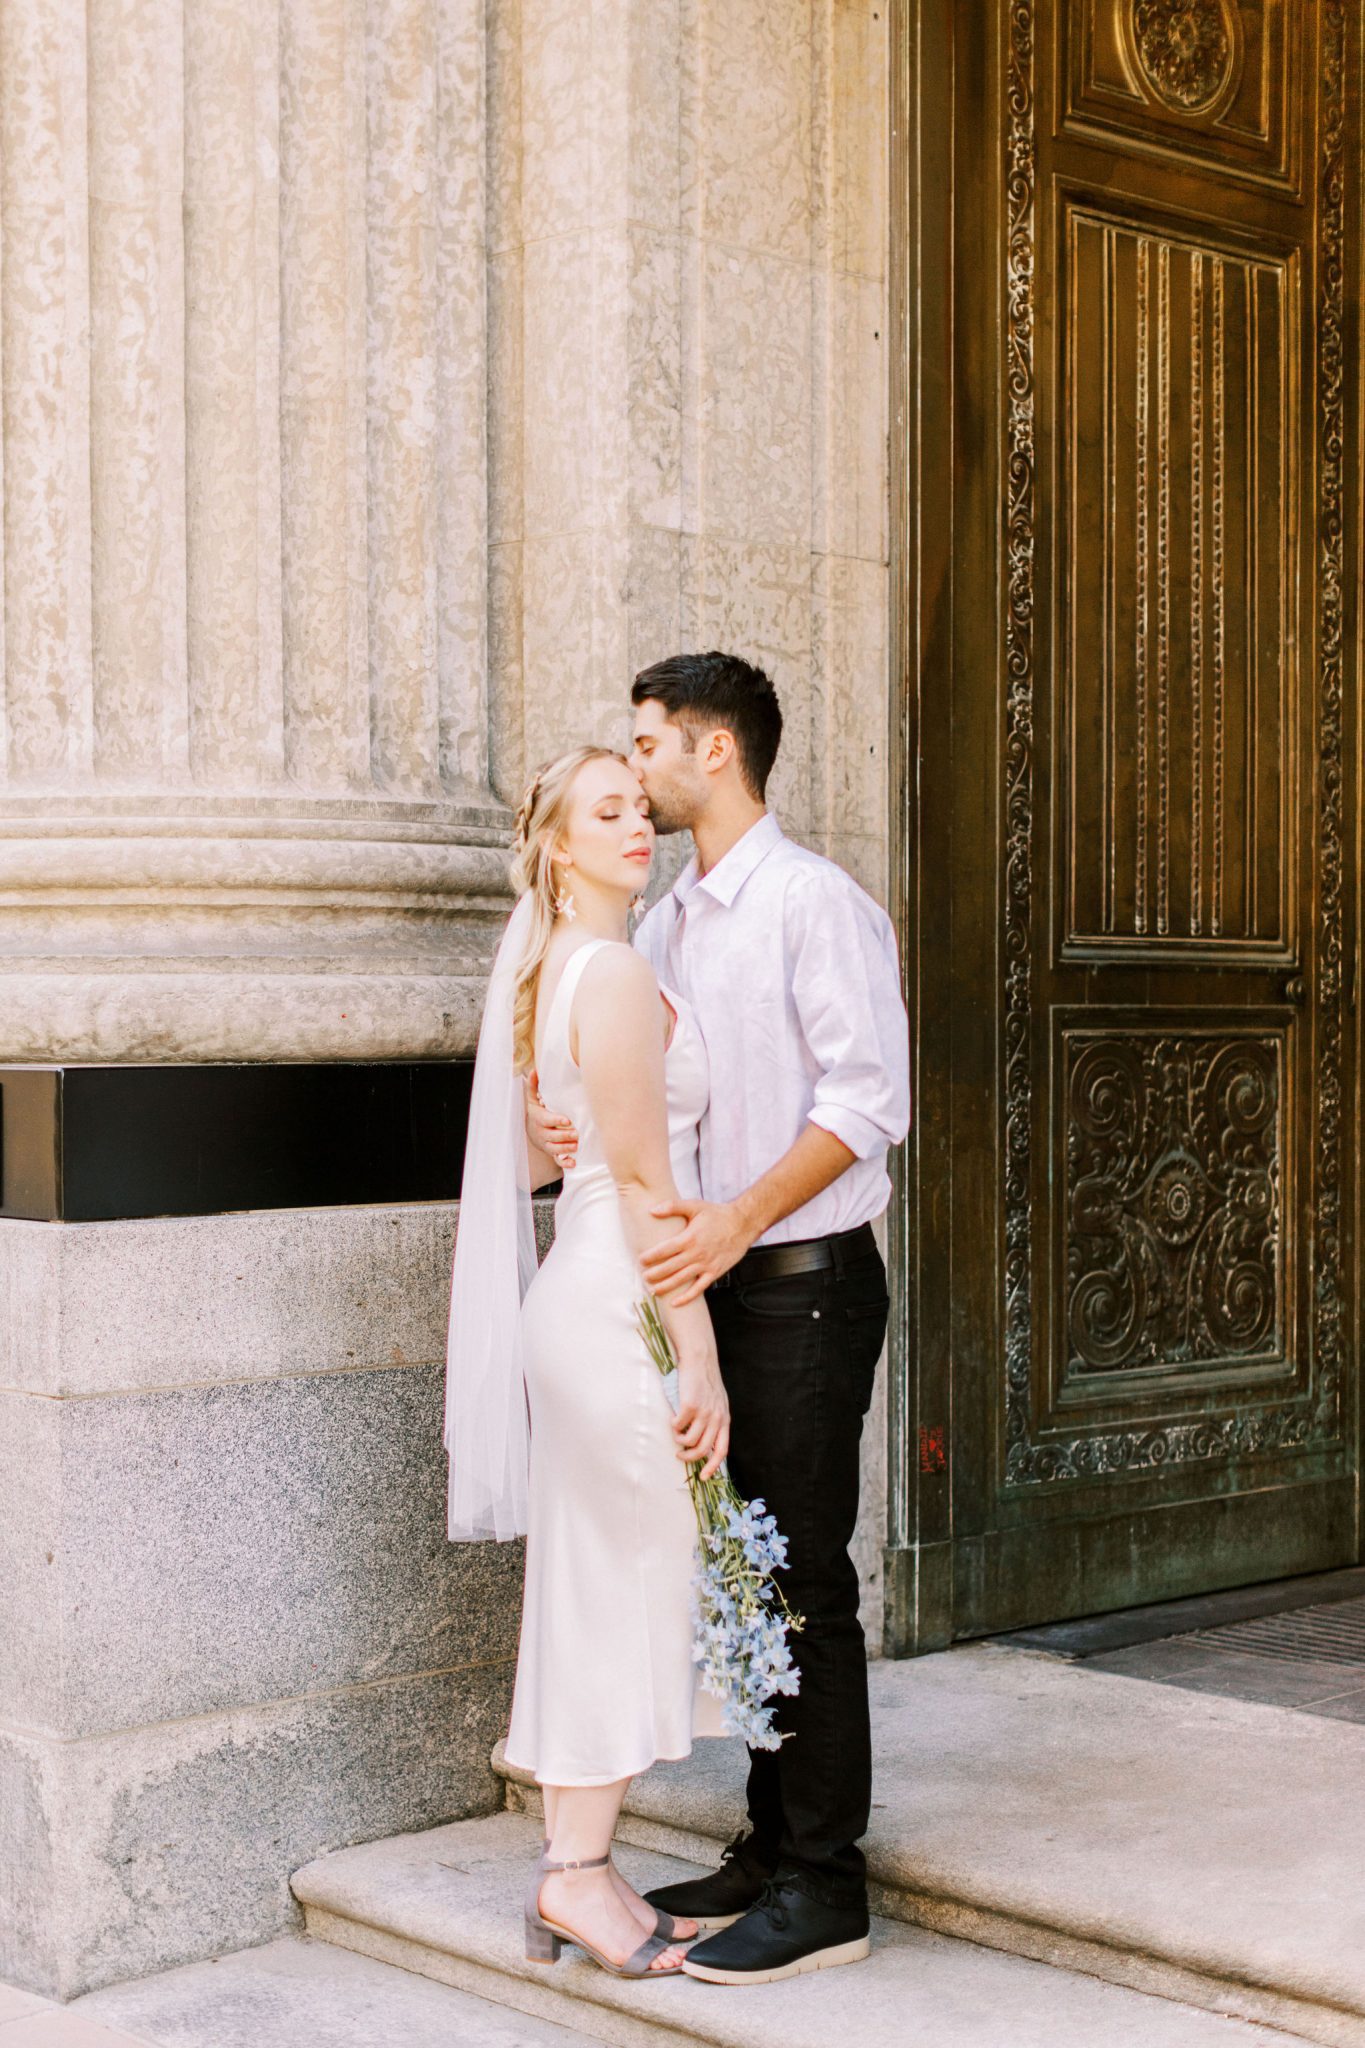 Modern elopement couple pose on the streets of downtown Calgary for this elopement inspiration shoot with hints of a European getaway